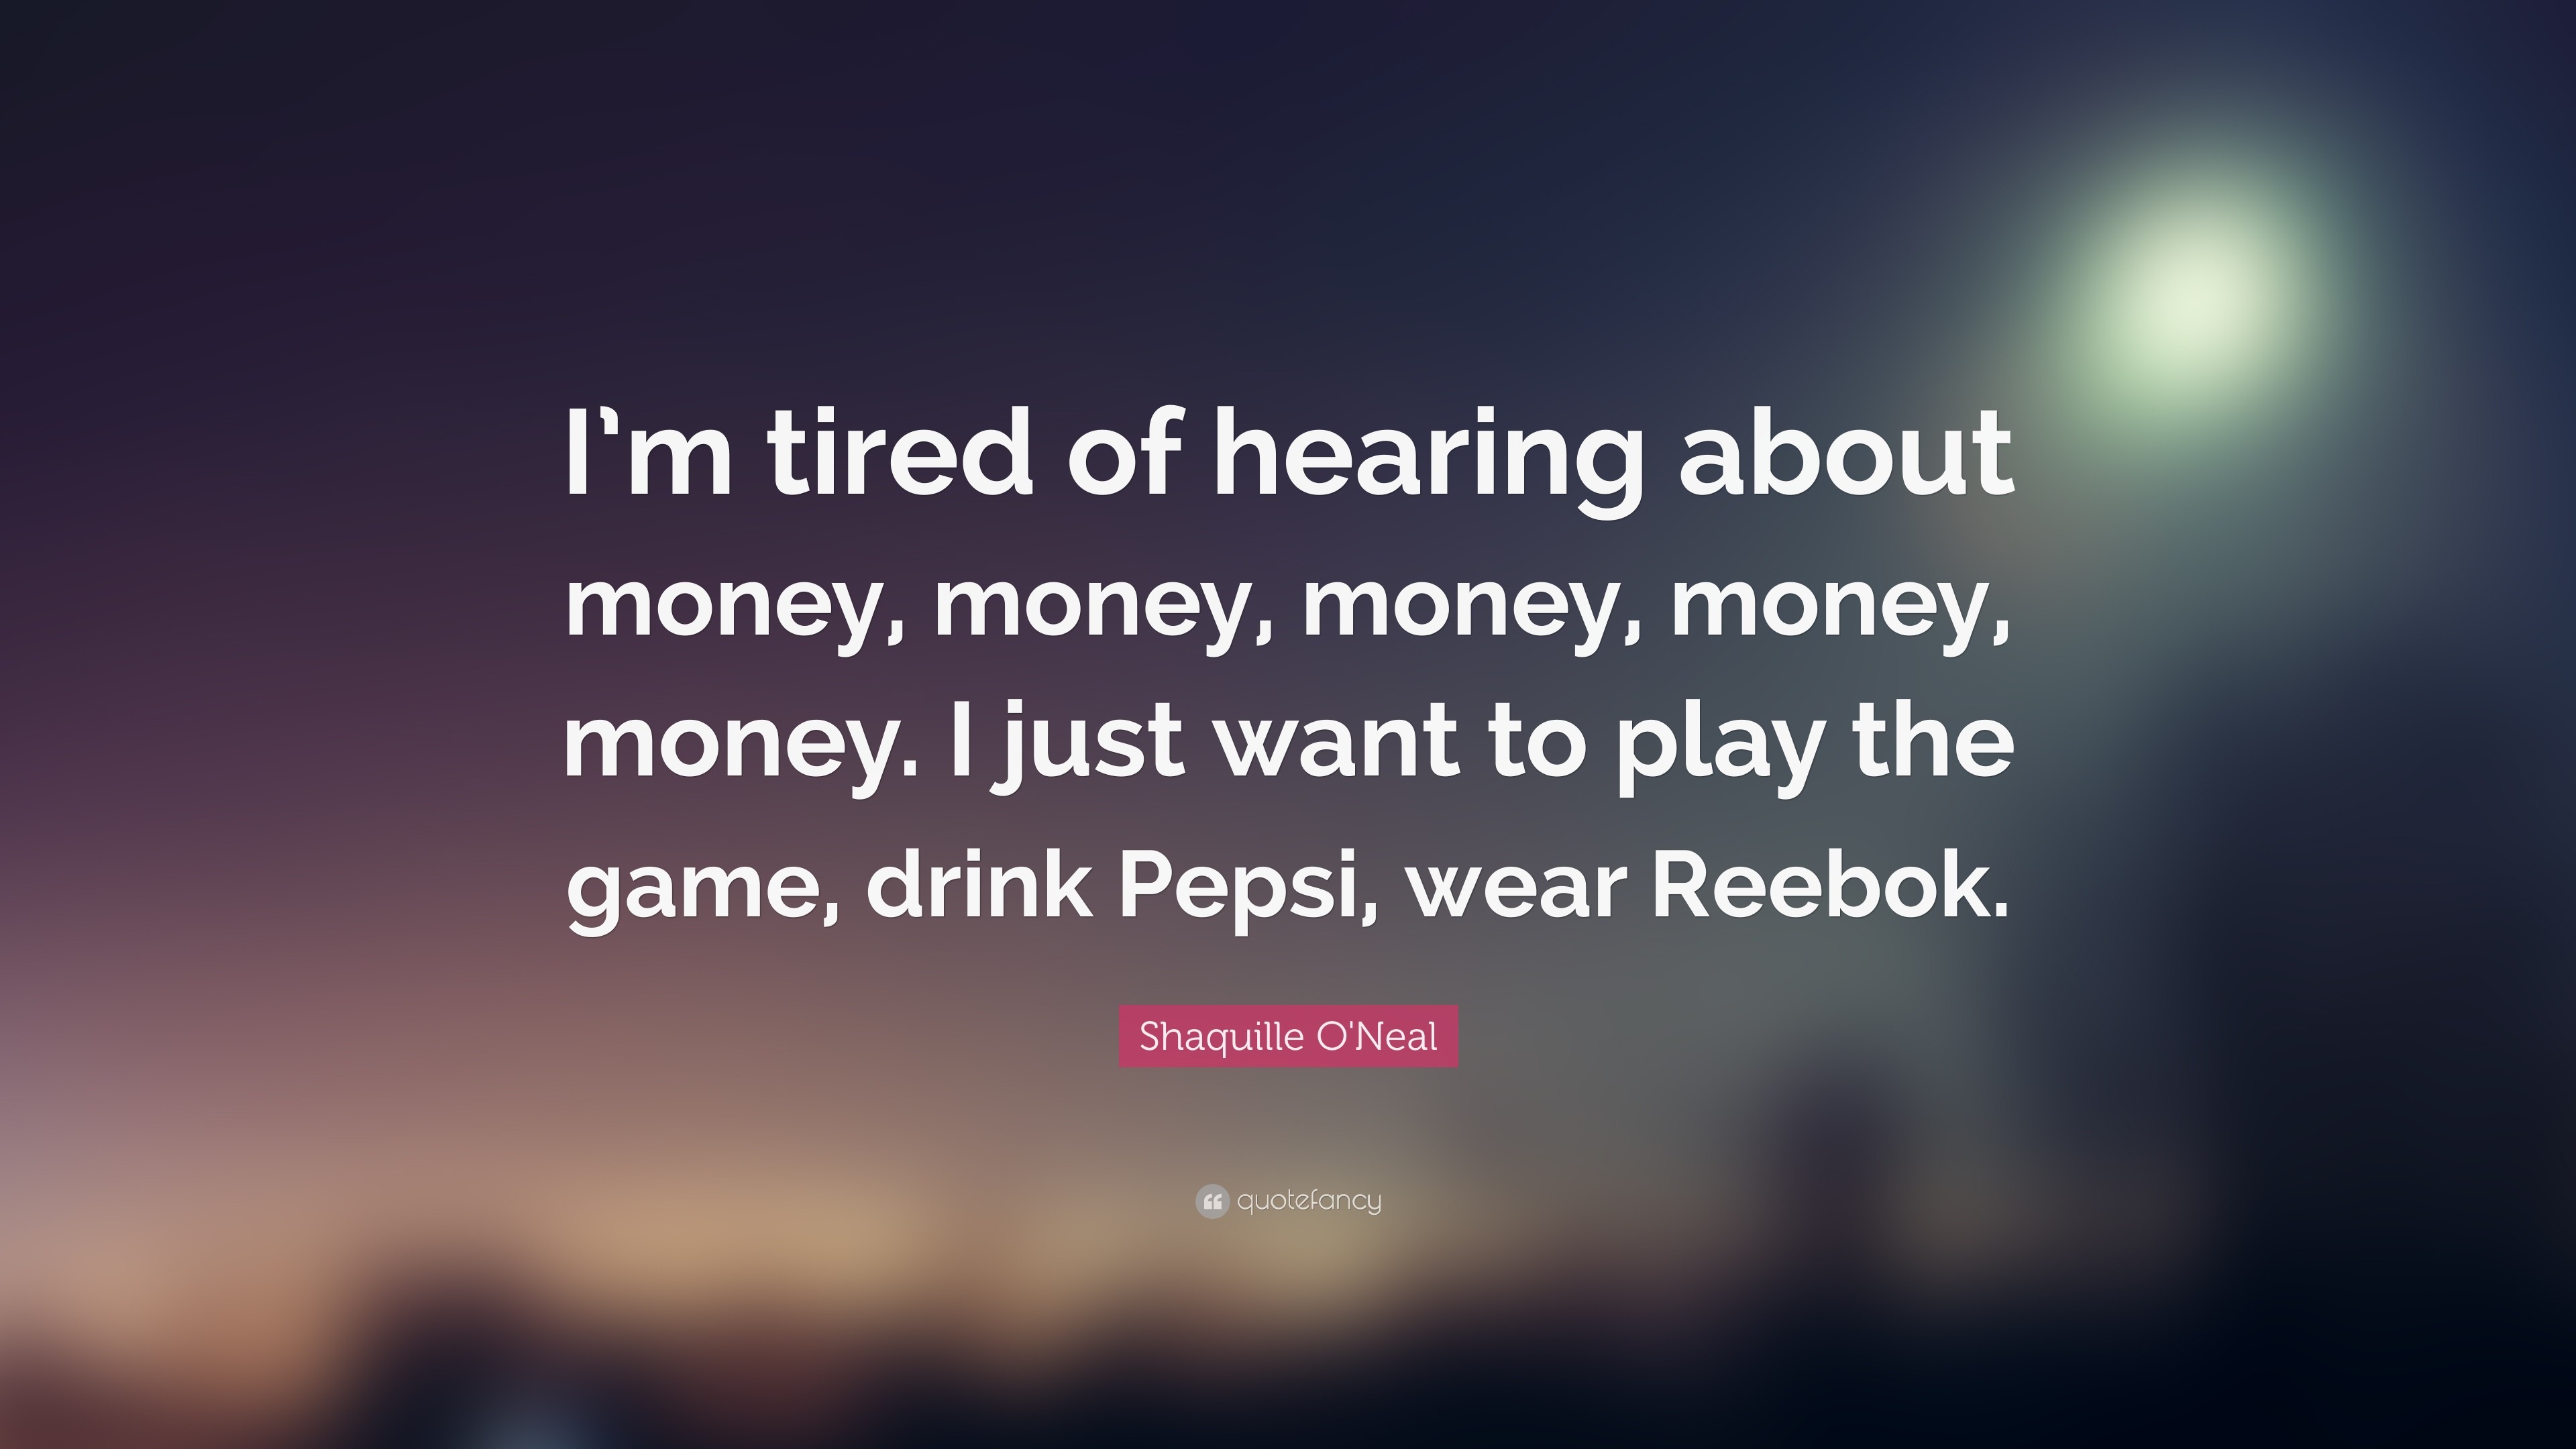 3840x2160 Shaquille O'Neal Quote: “I'm tired of hearing about money,